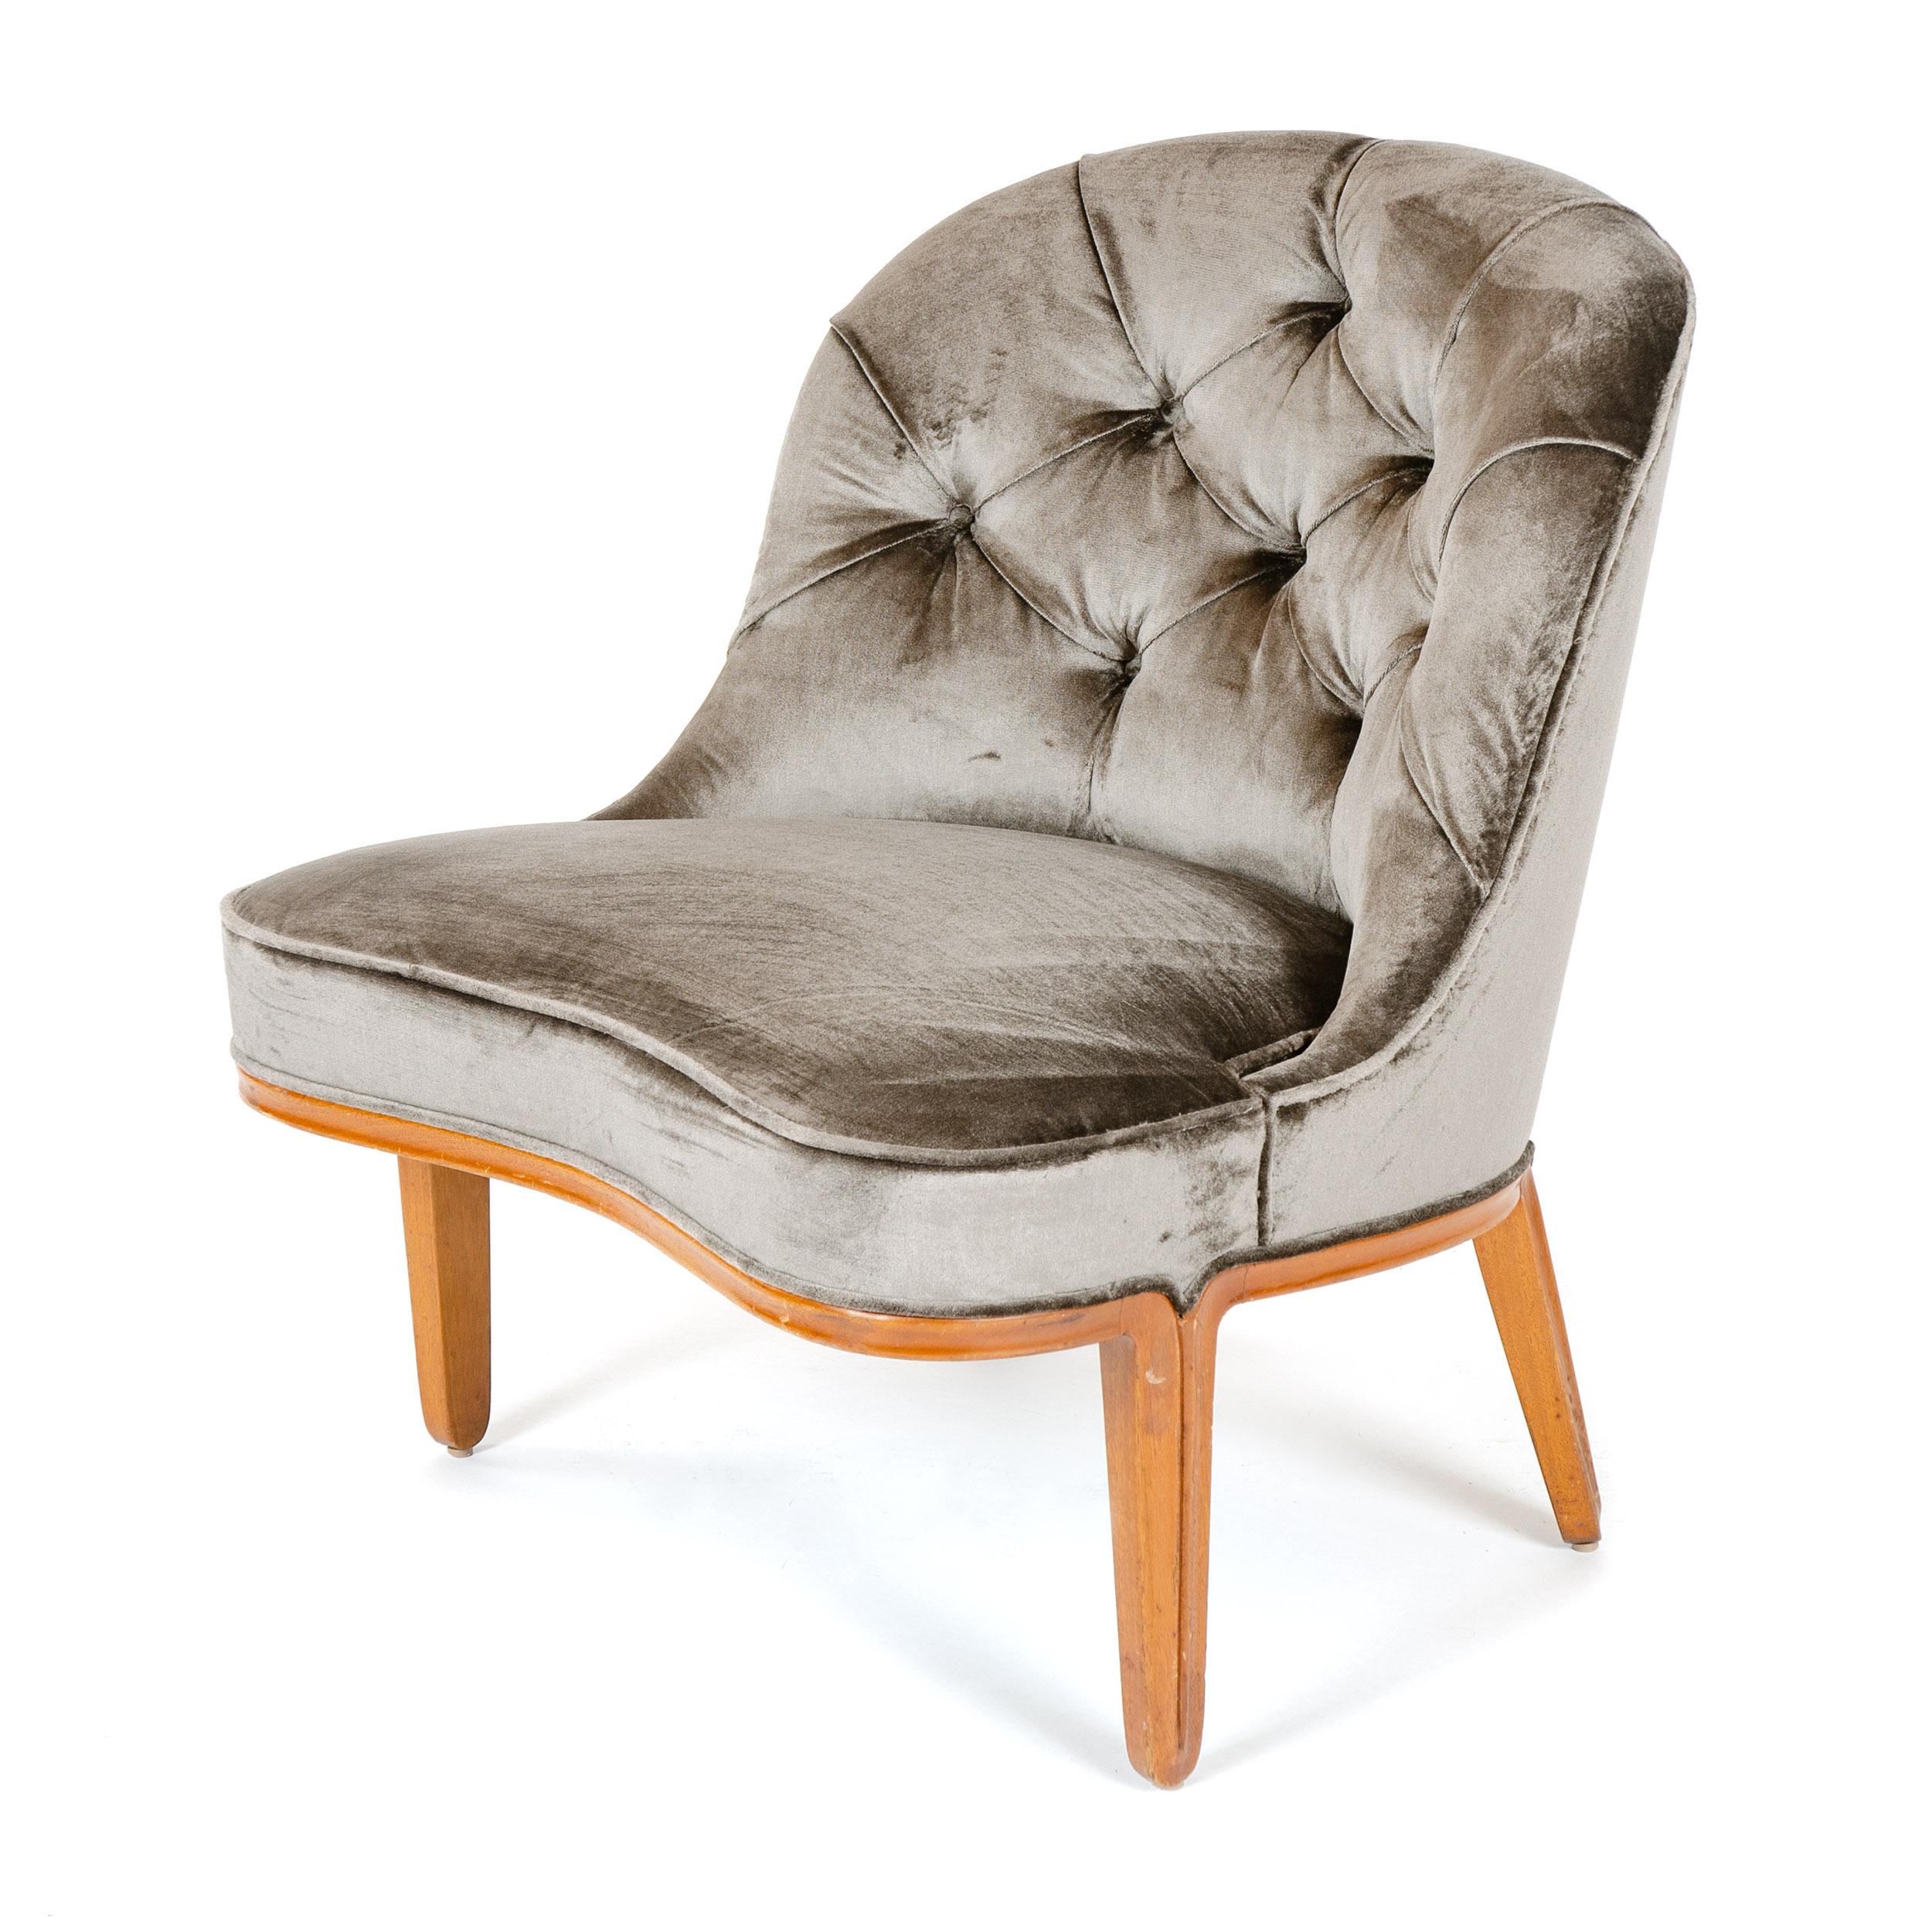 An armless slipper chair from the Janus collection with button tufted upholstery and beautifully carved integral walnut base. Model 5775.